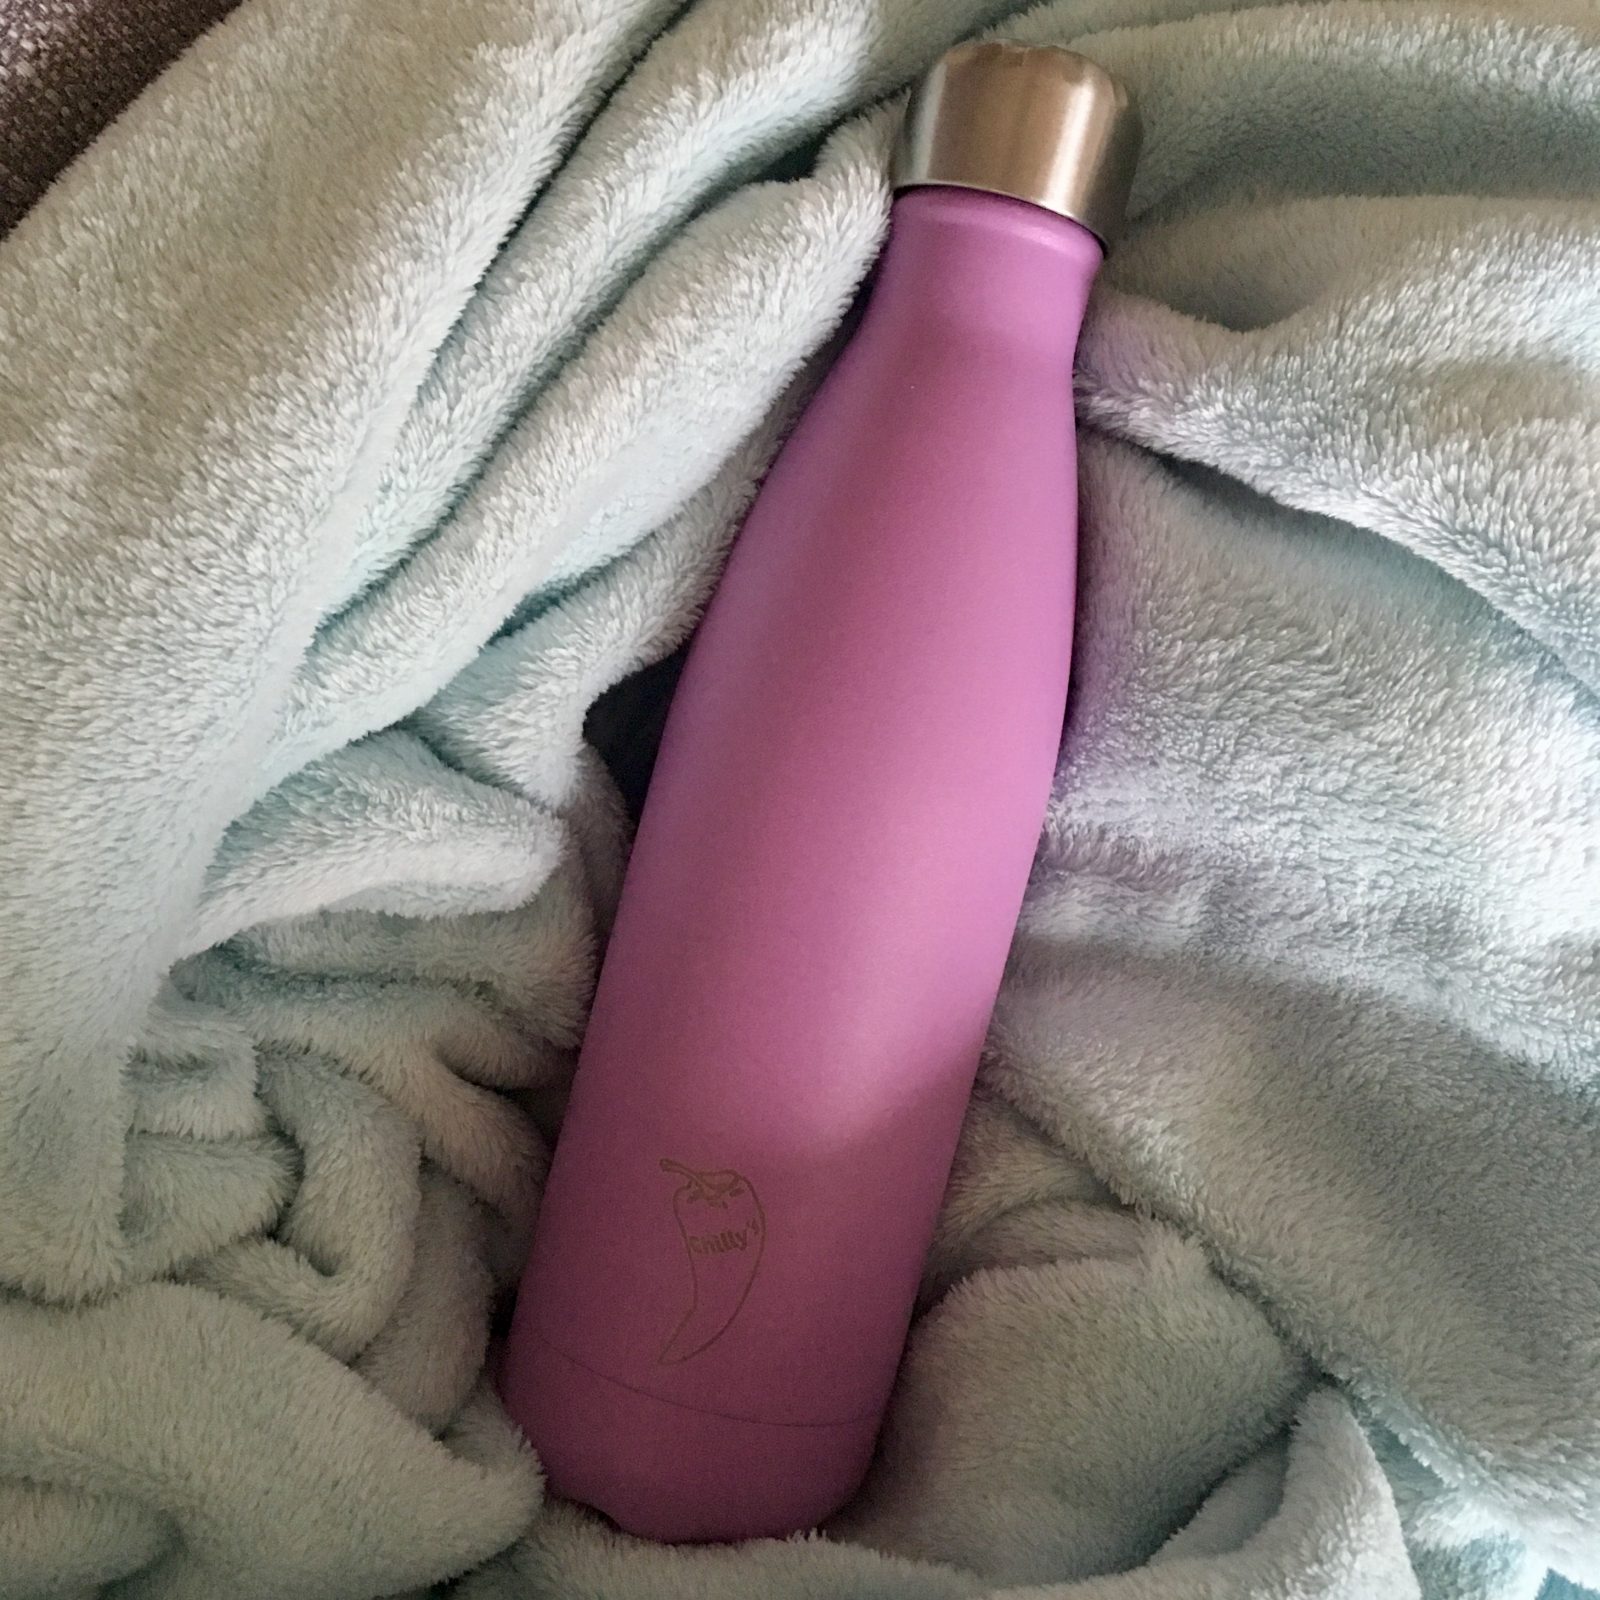 lilac chills water bottle places on blue blanket